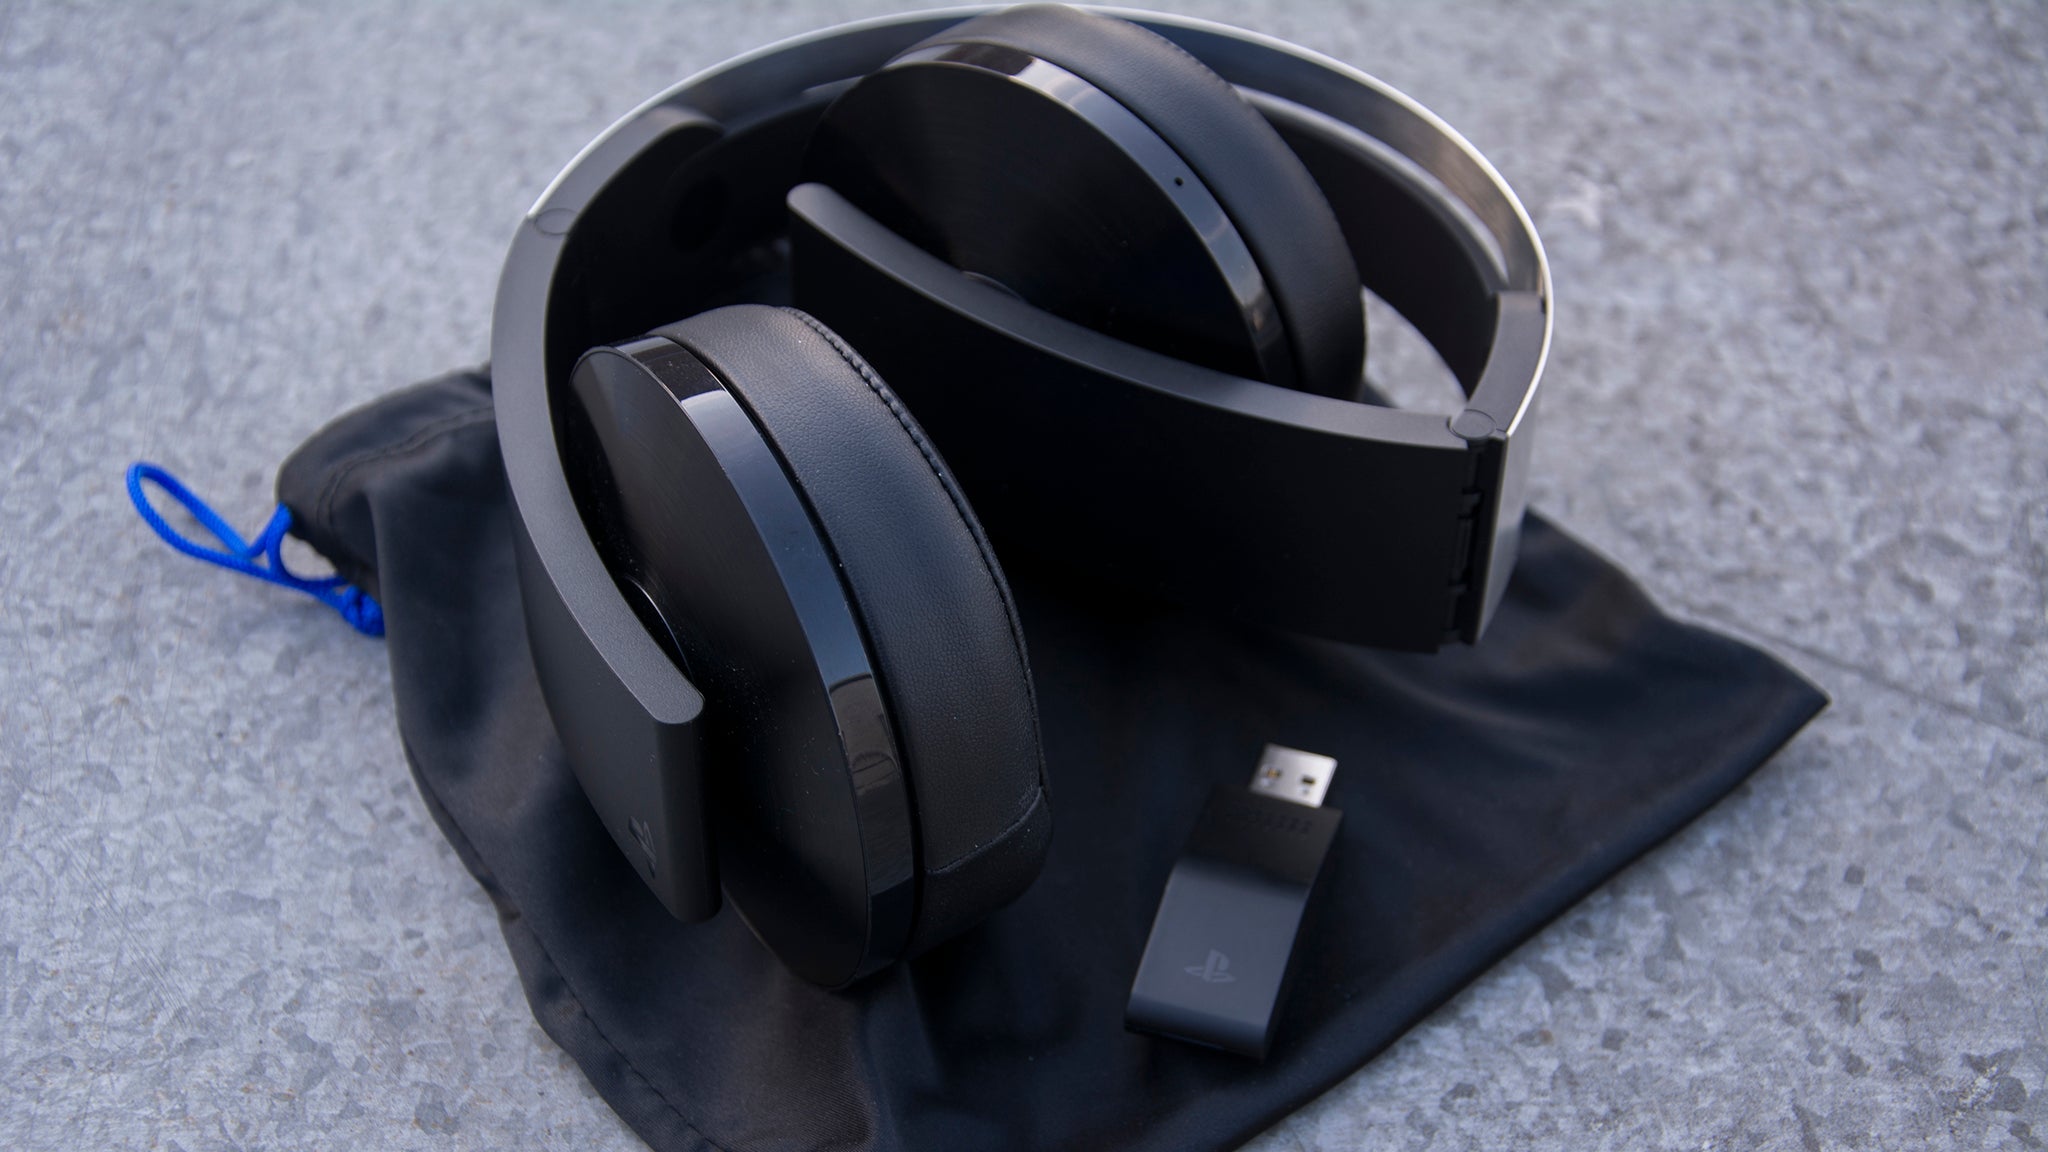 Frons Marxisme Relatief PlayStation Platinum Wireless Headset review: Is this the best PS4 headset  money can buy? | Expert Reviews